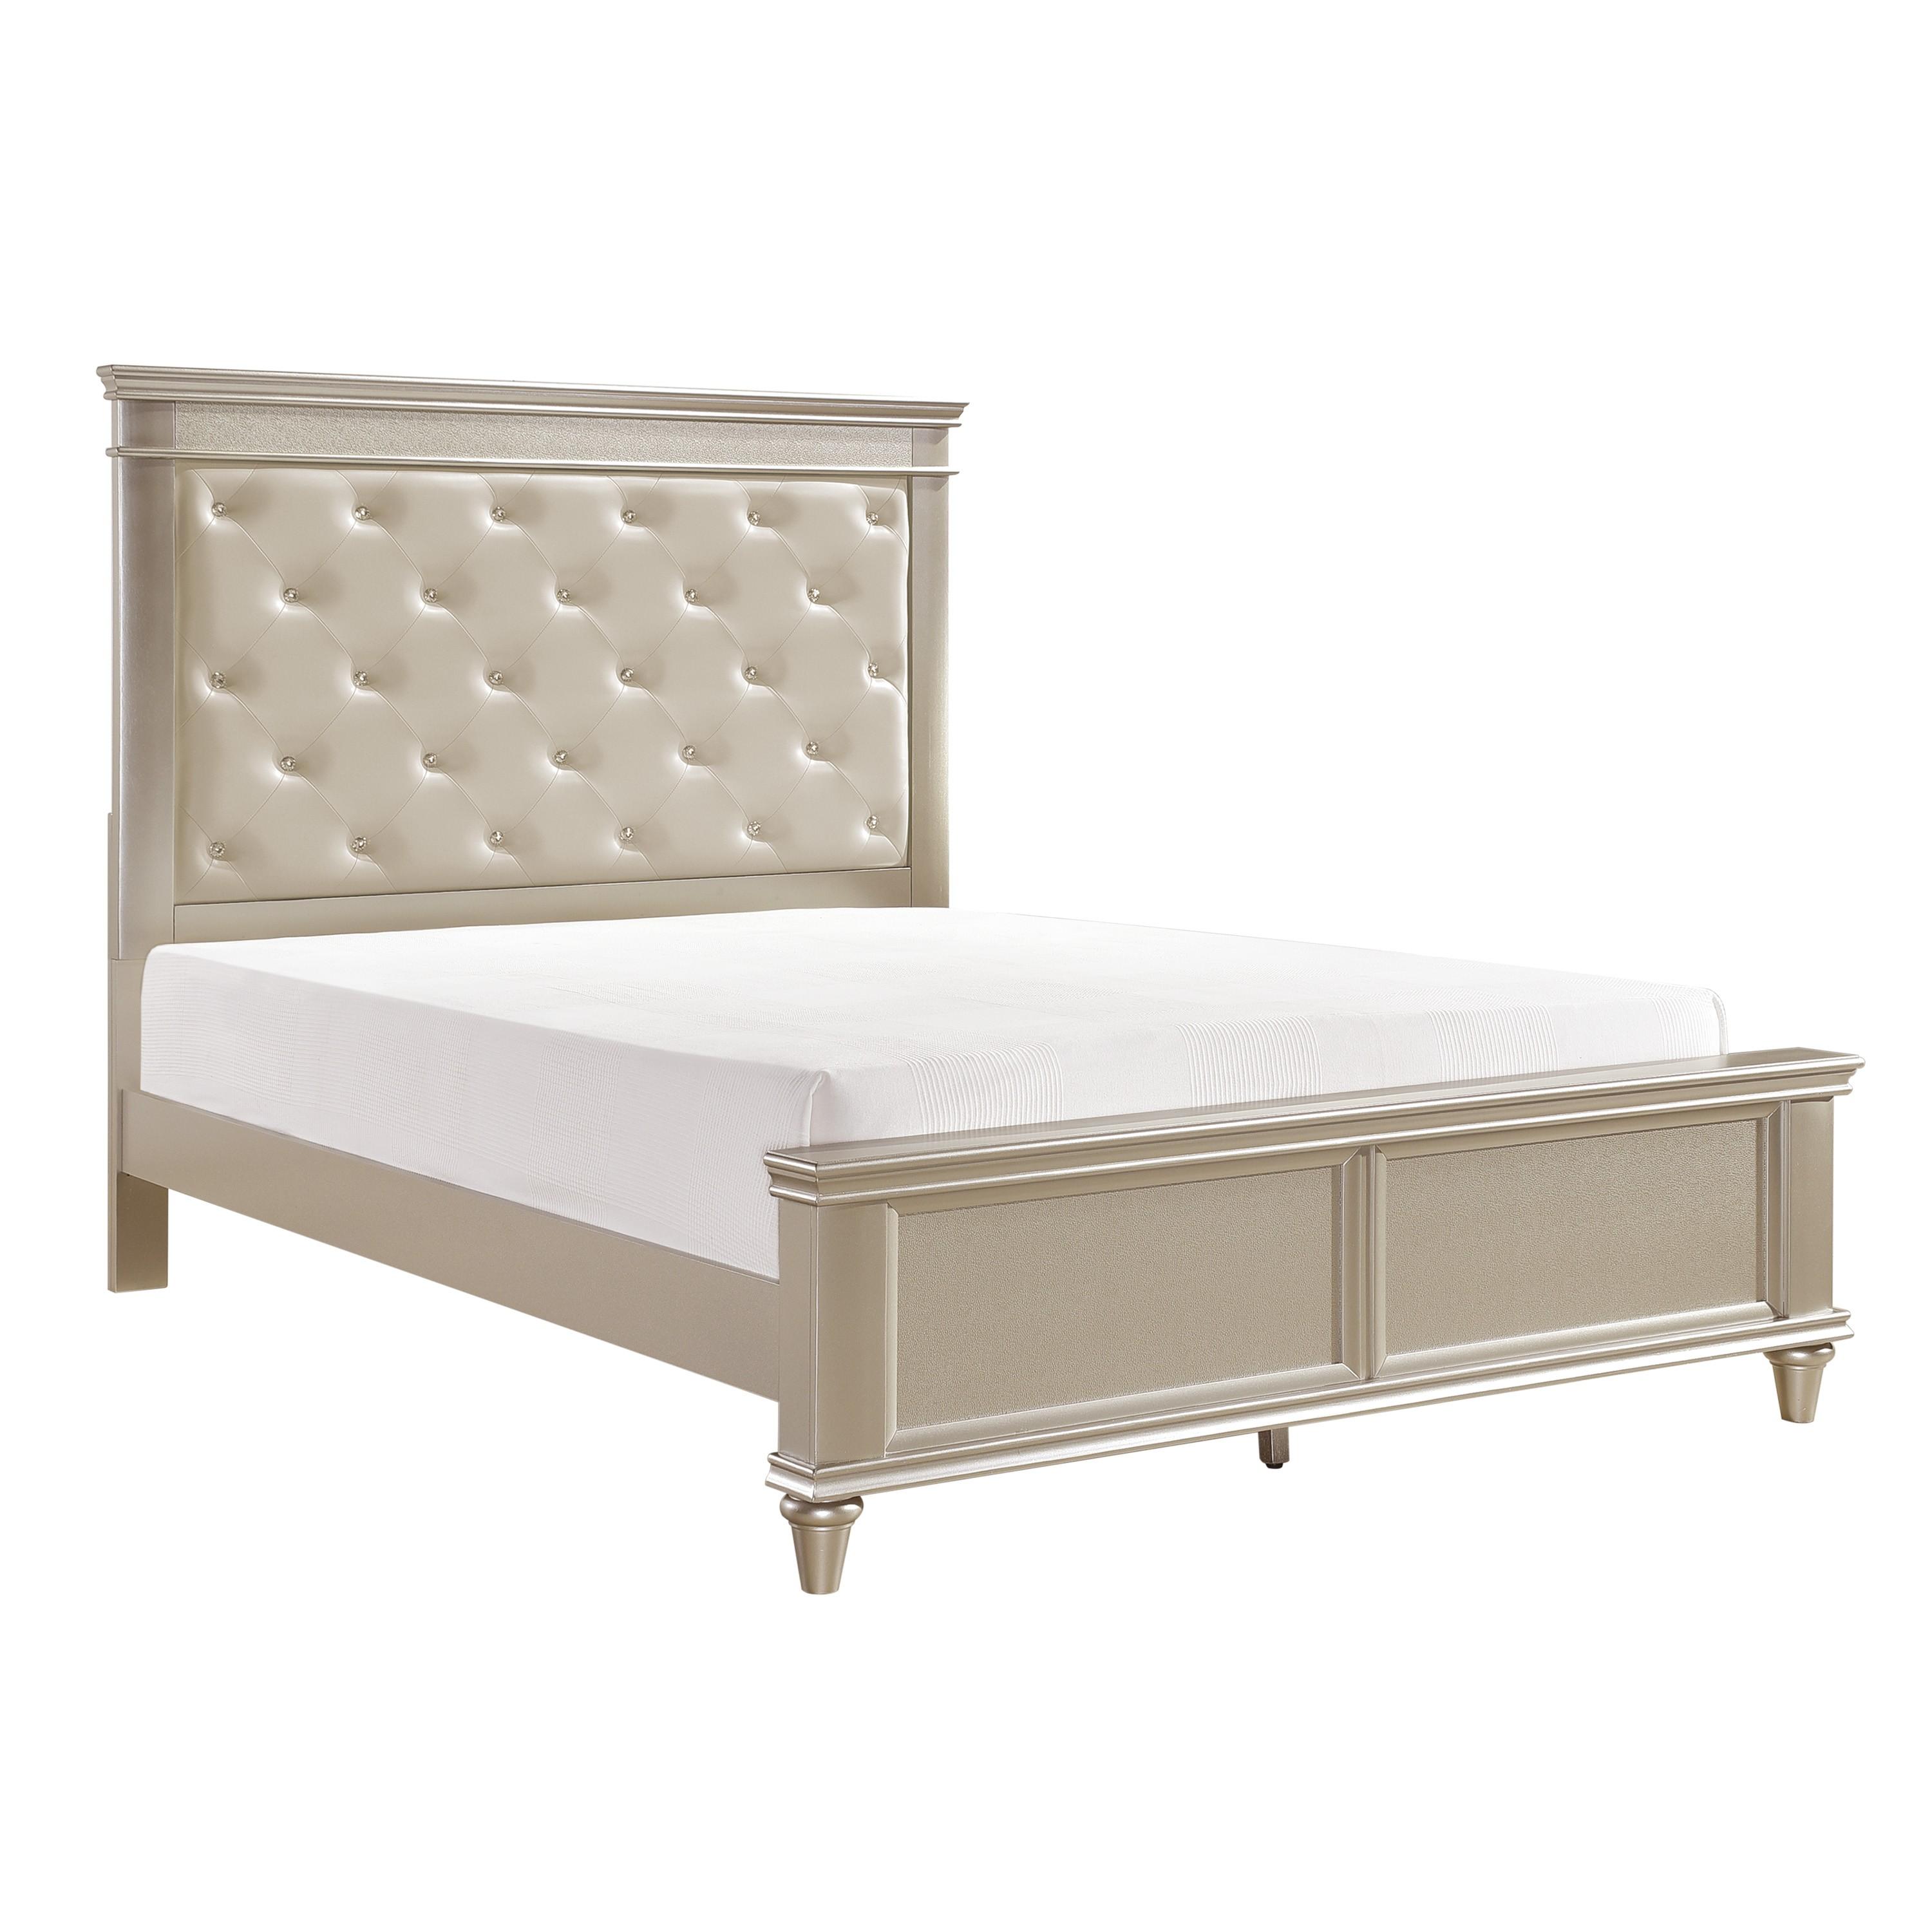 Traditional Bed 1928K-1CK* Celandine 1928K-1CK* in Off-White, Silver Faux Leather